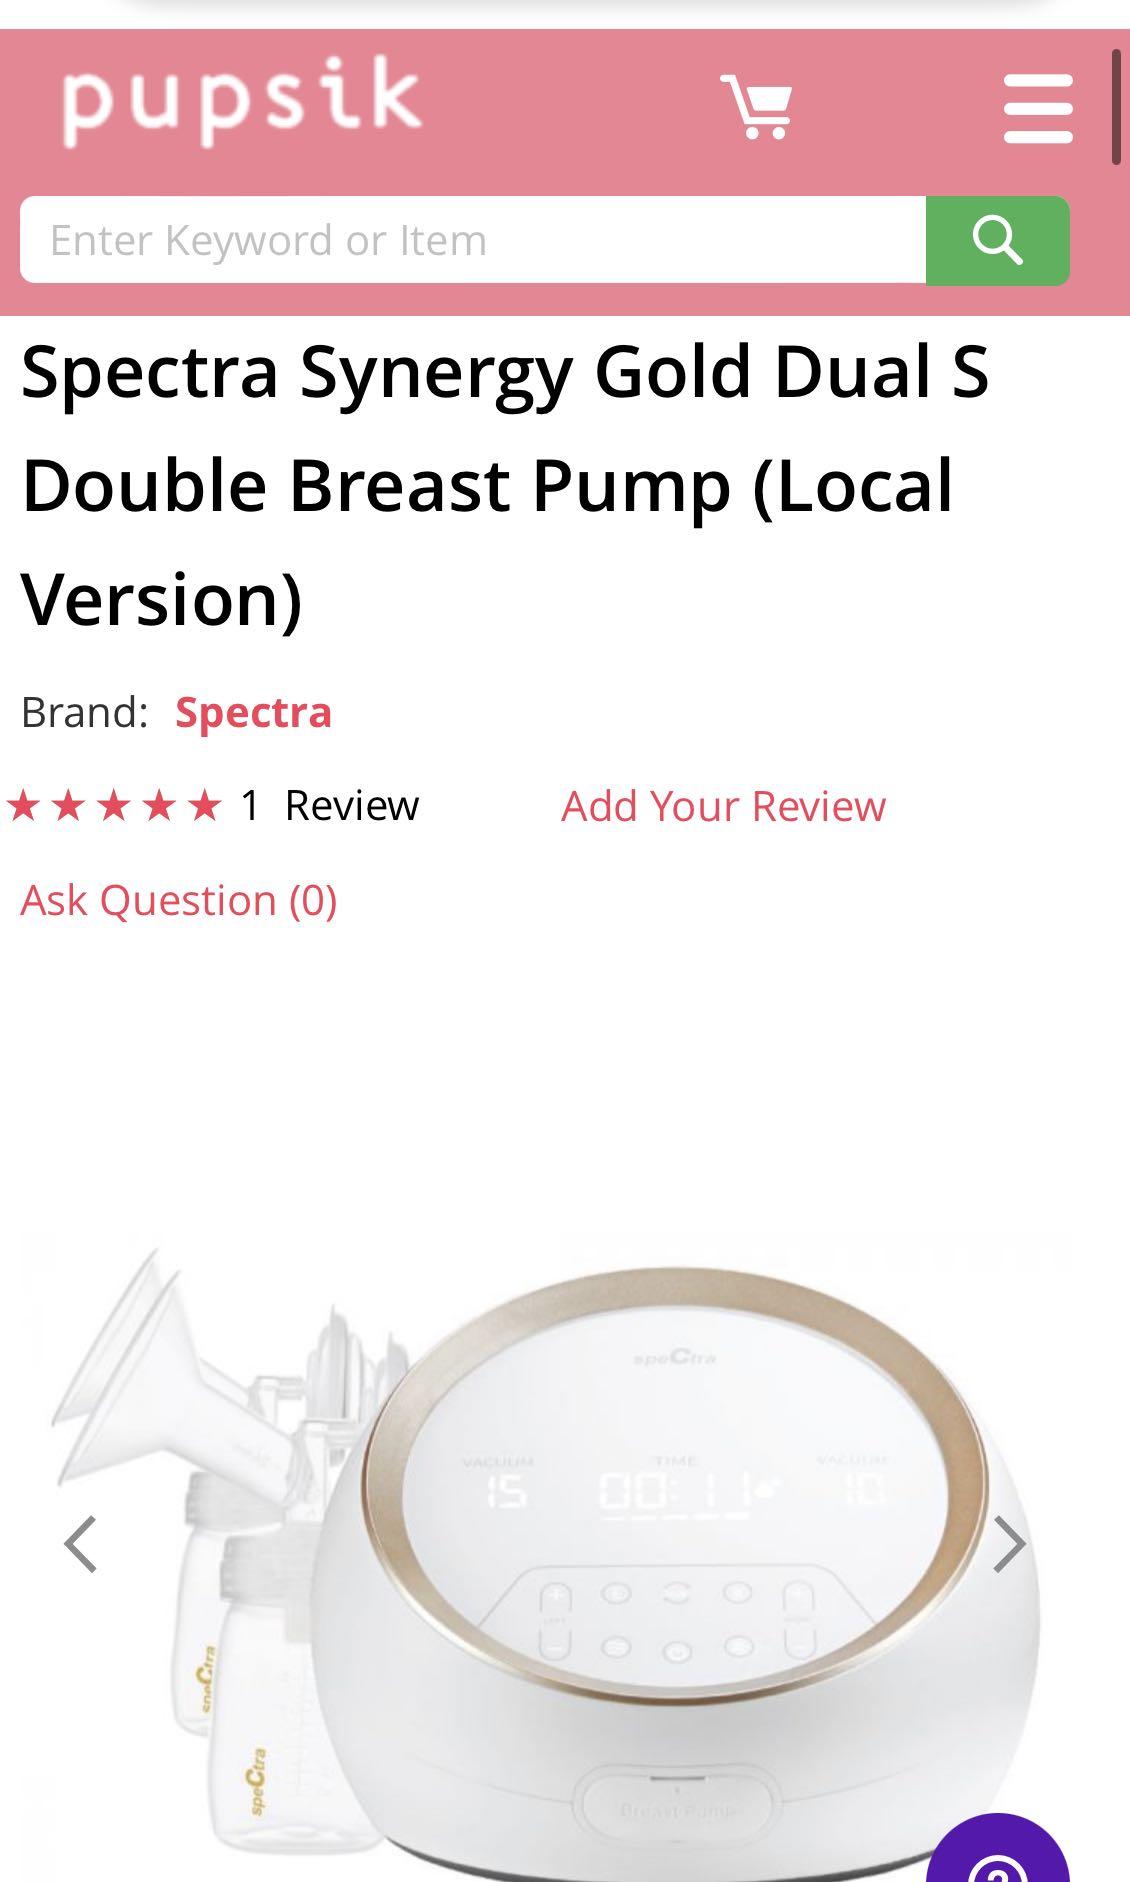 Spectra Synergy Gold Dual S Double Breast Pump (Local Version